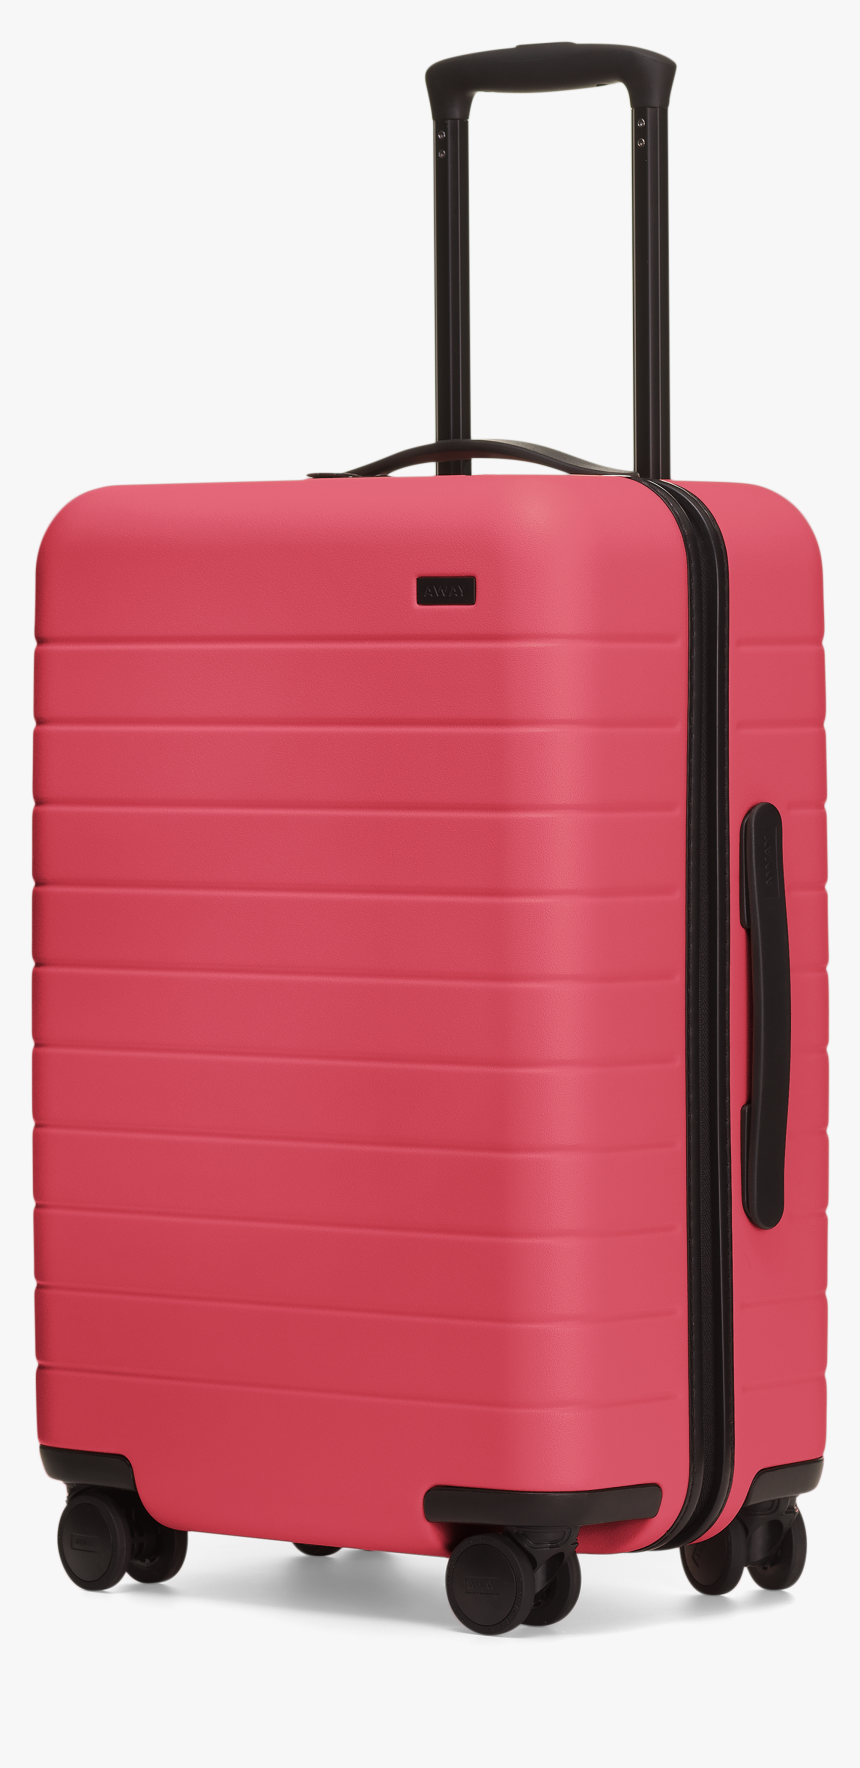 Luggage Png, Transparent Png, Free Download